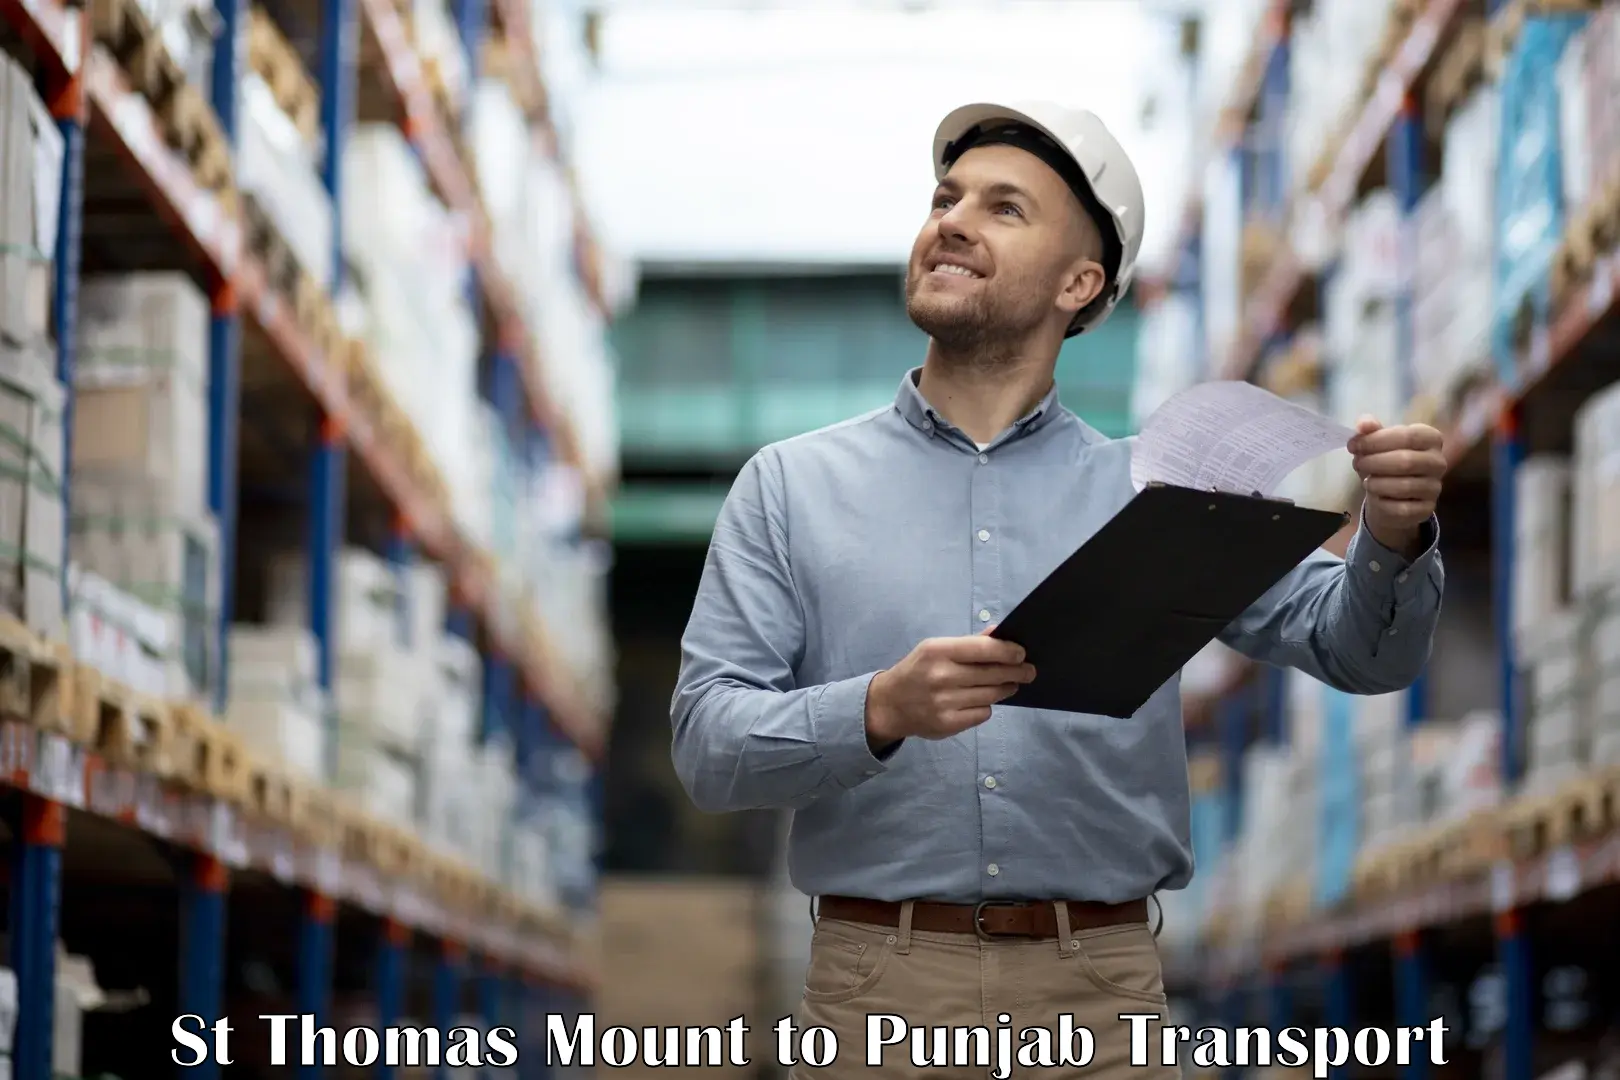 Commercial transport service St Thomas Mount to Dhilwan